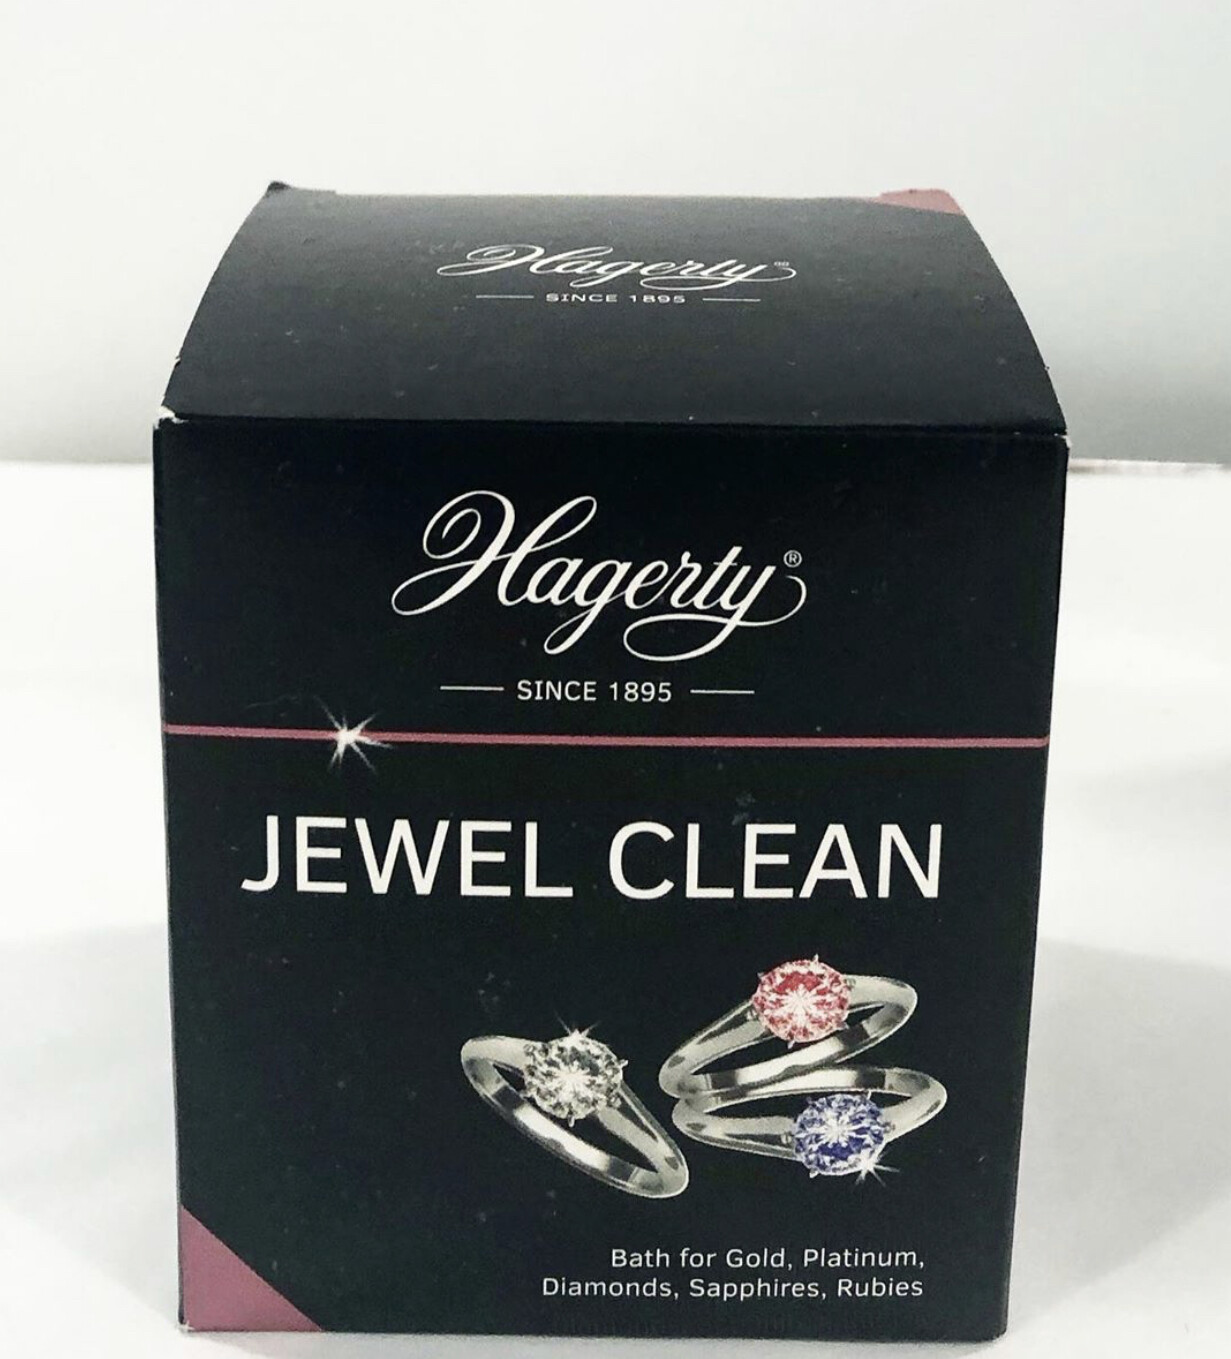 HAGERTY - Jewel Clean